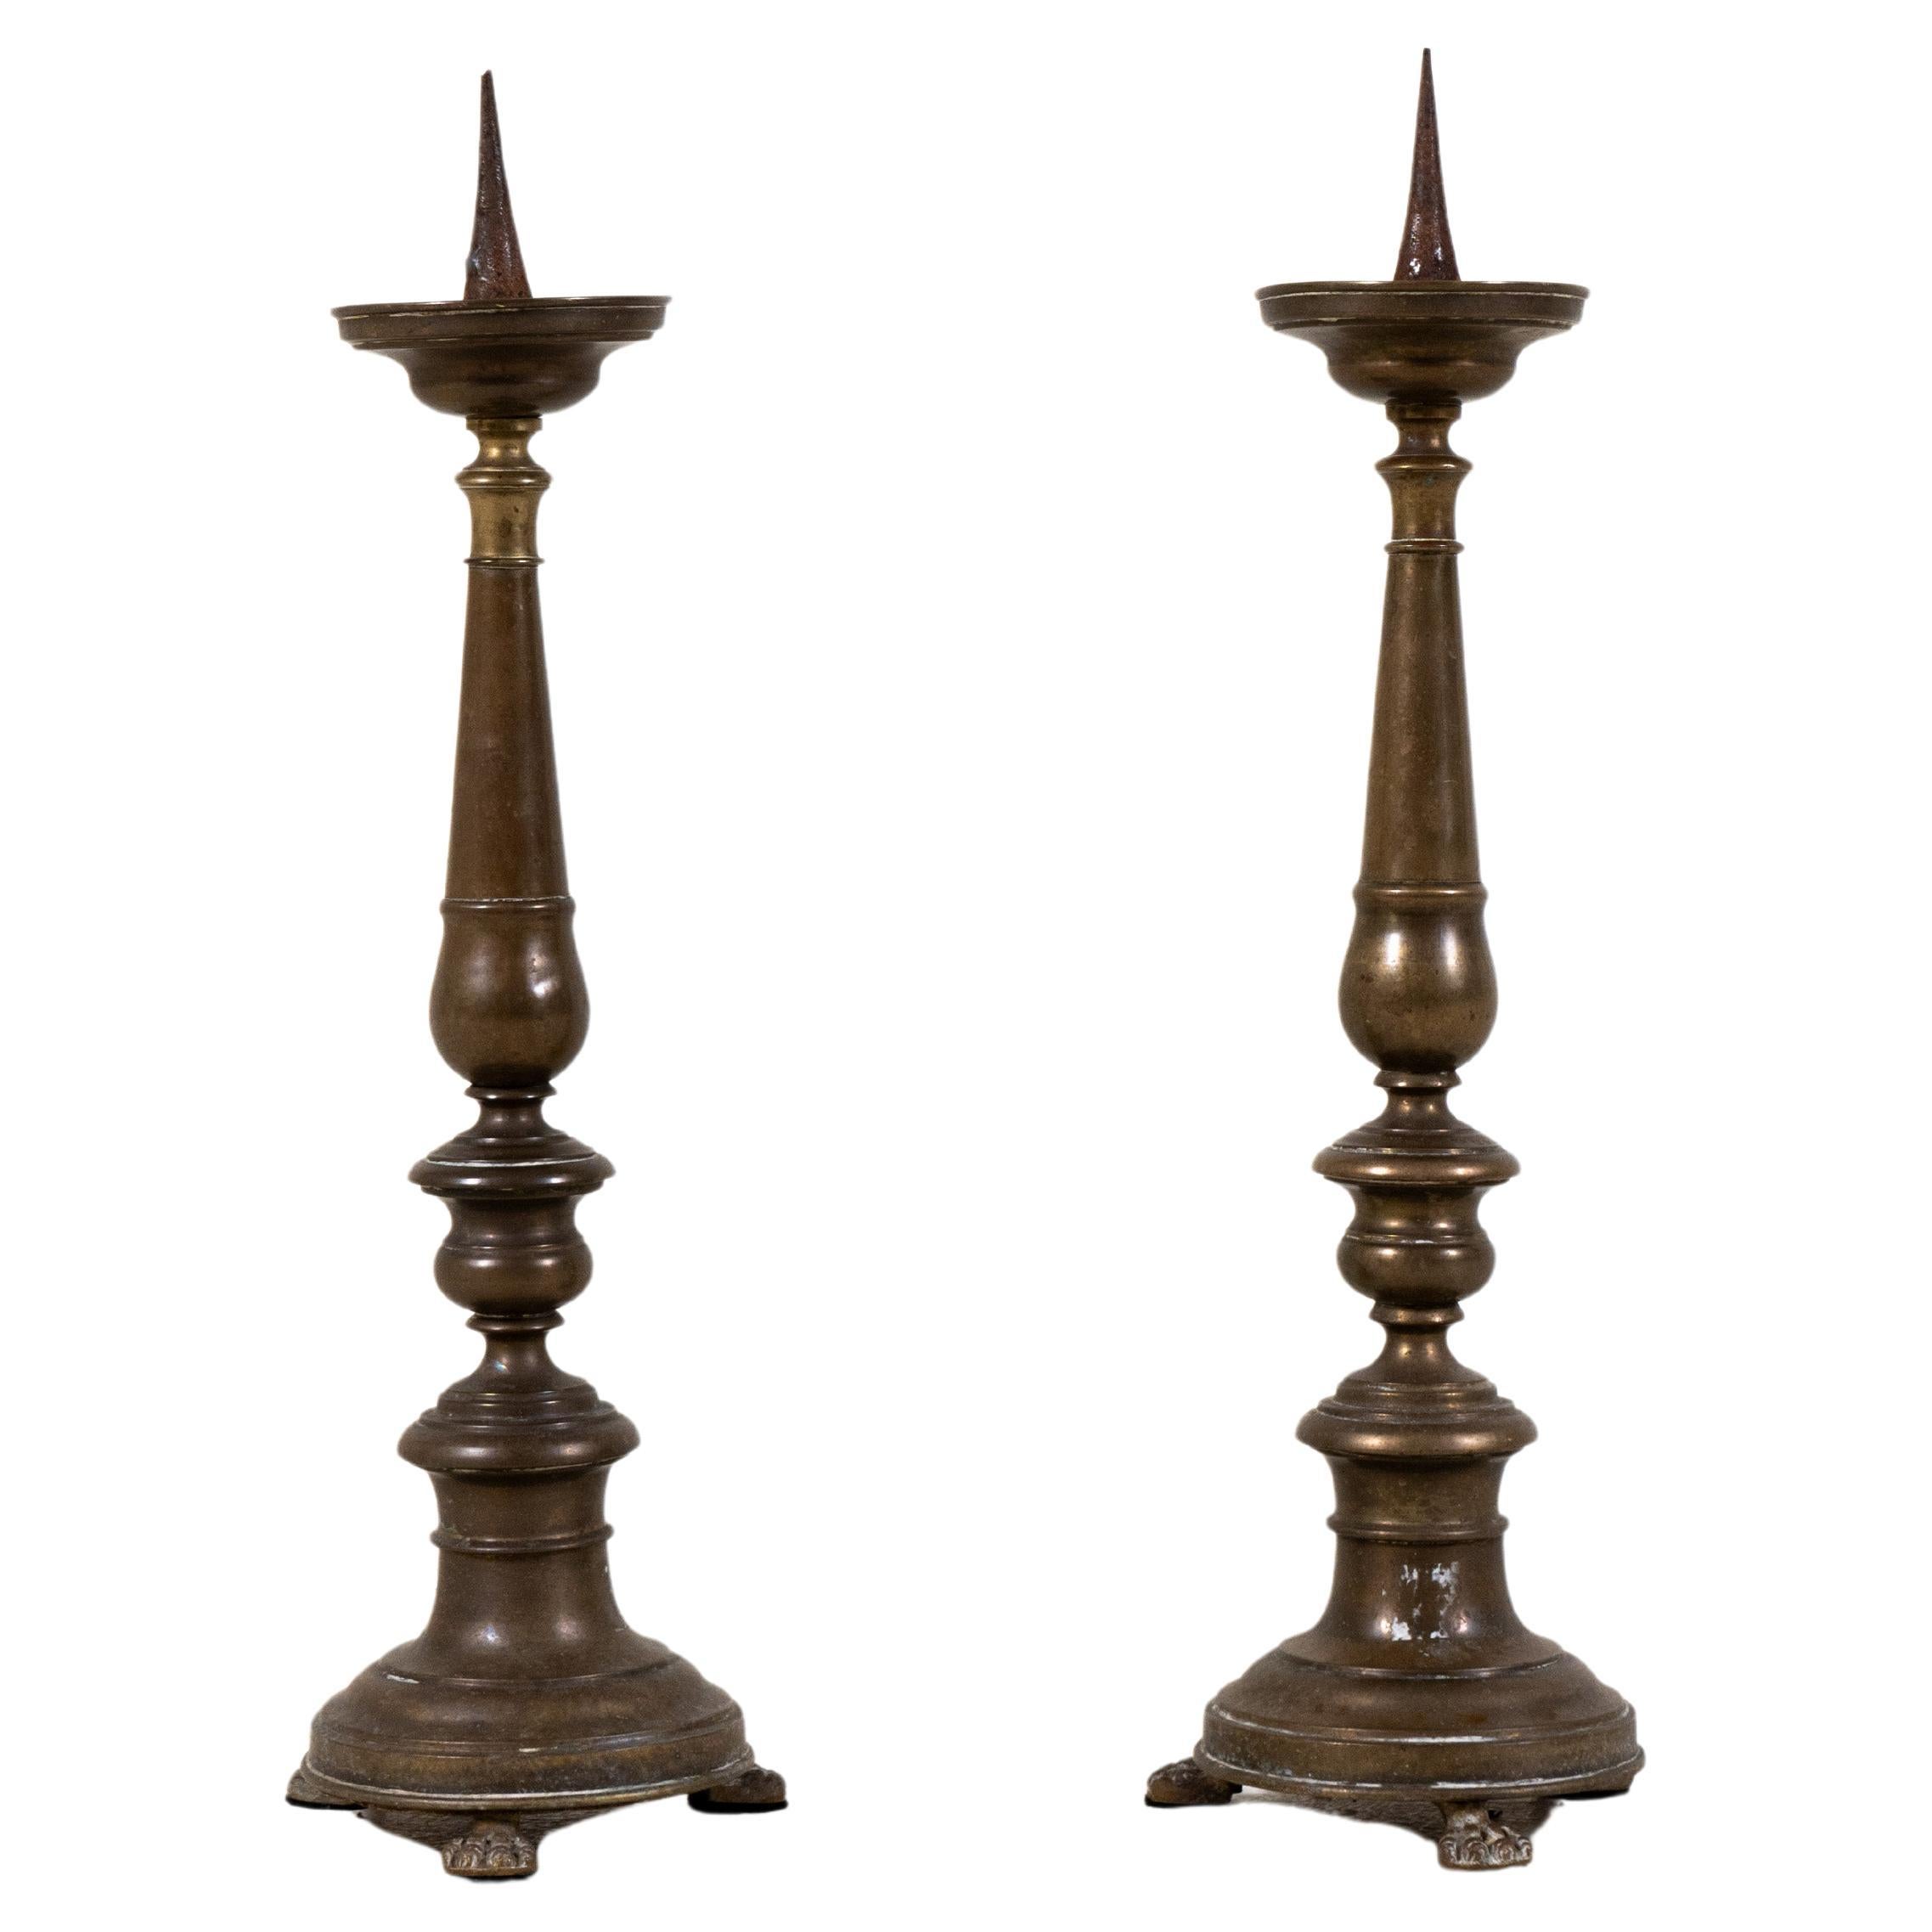 A Pair of French Brass Candleholders, c. 1900